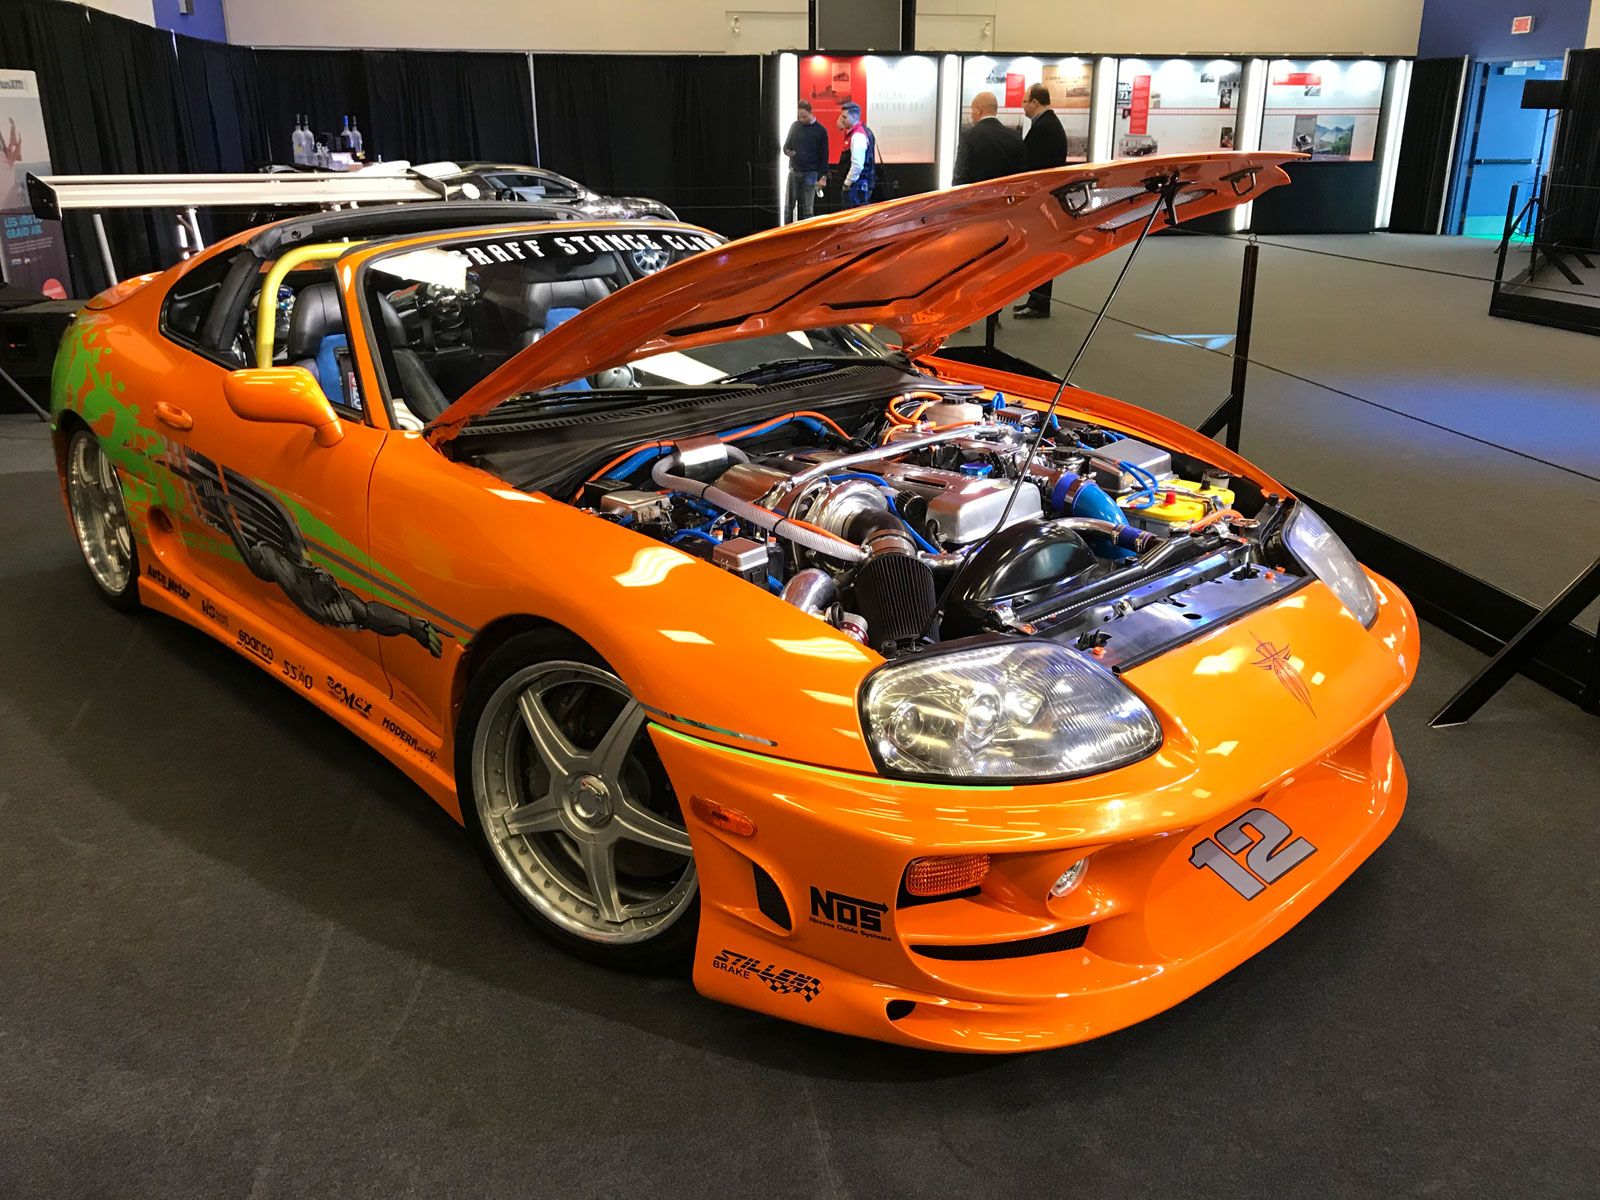 Interview With Dave Deschenes Who Has Replicated Paul Walker's Toyota Supra From The Fast And The Furious